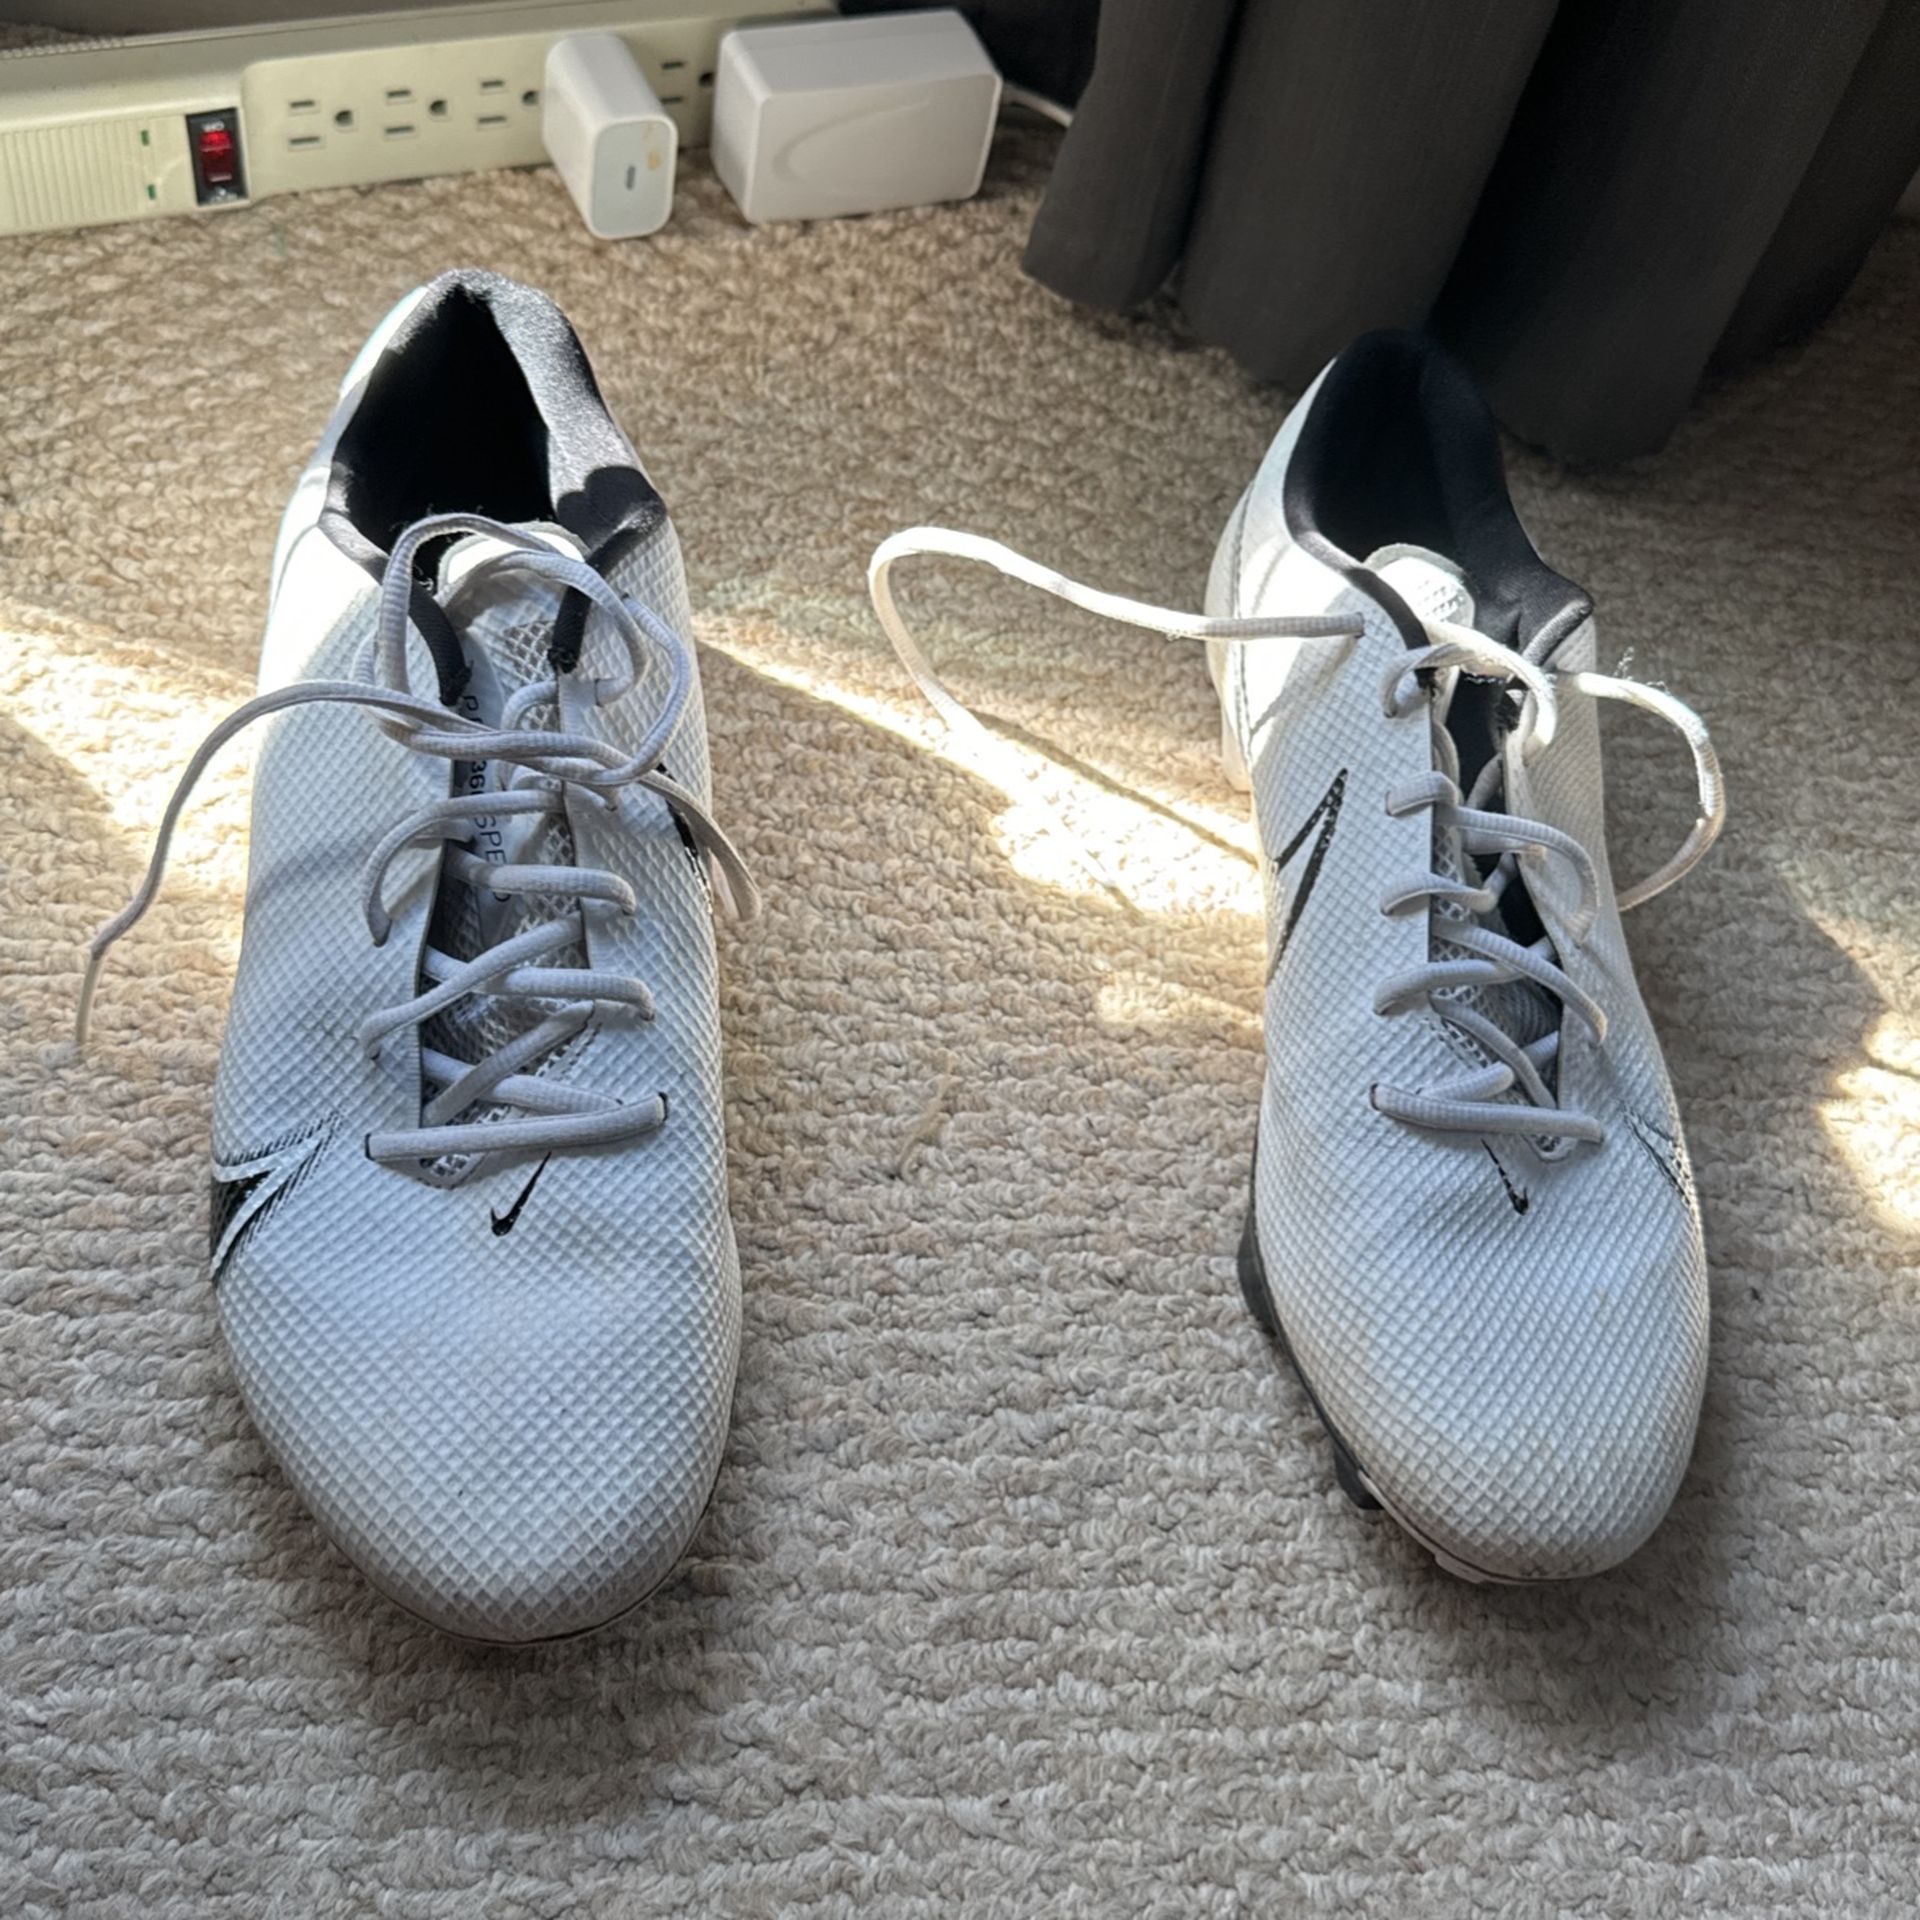 Outdoor Cleats - Size 12